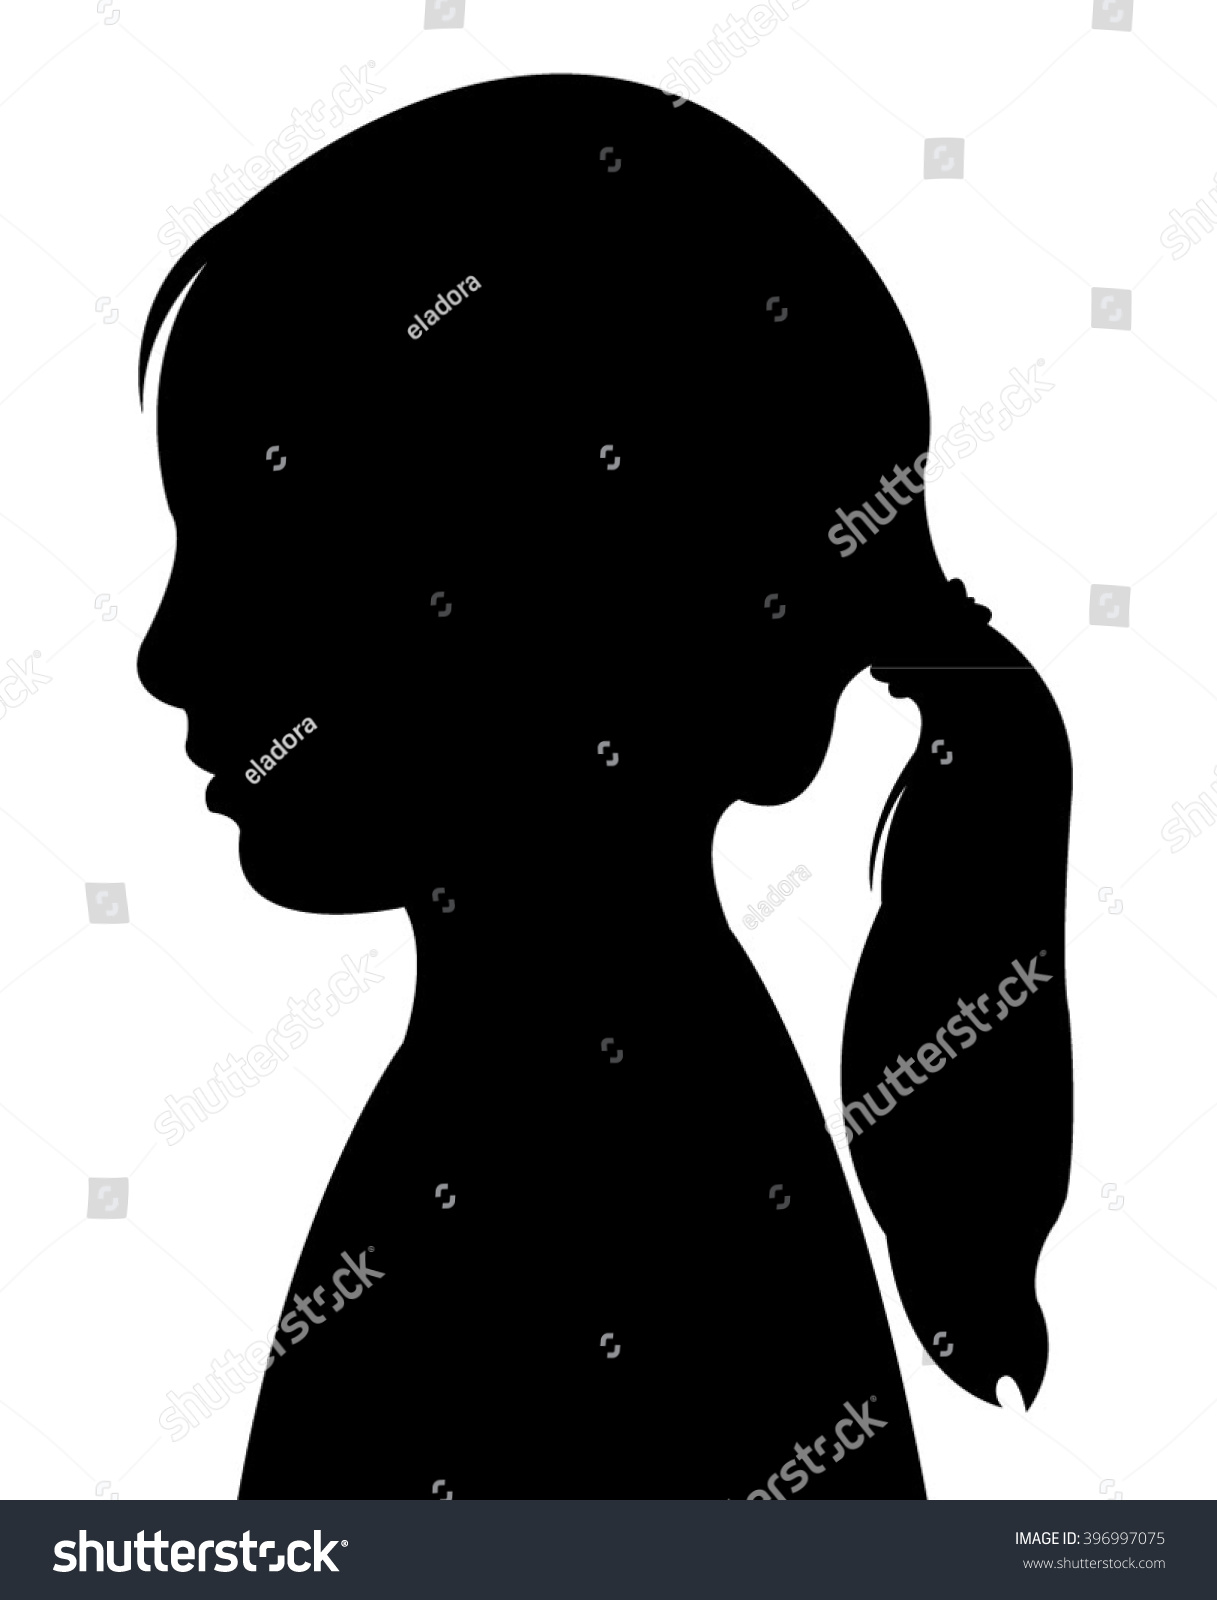 a child head silhouette vector - Royalty Free Stock Vector 396997075 ...